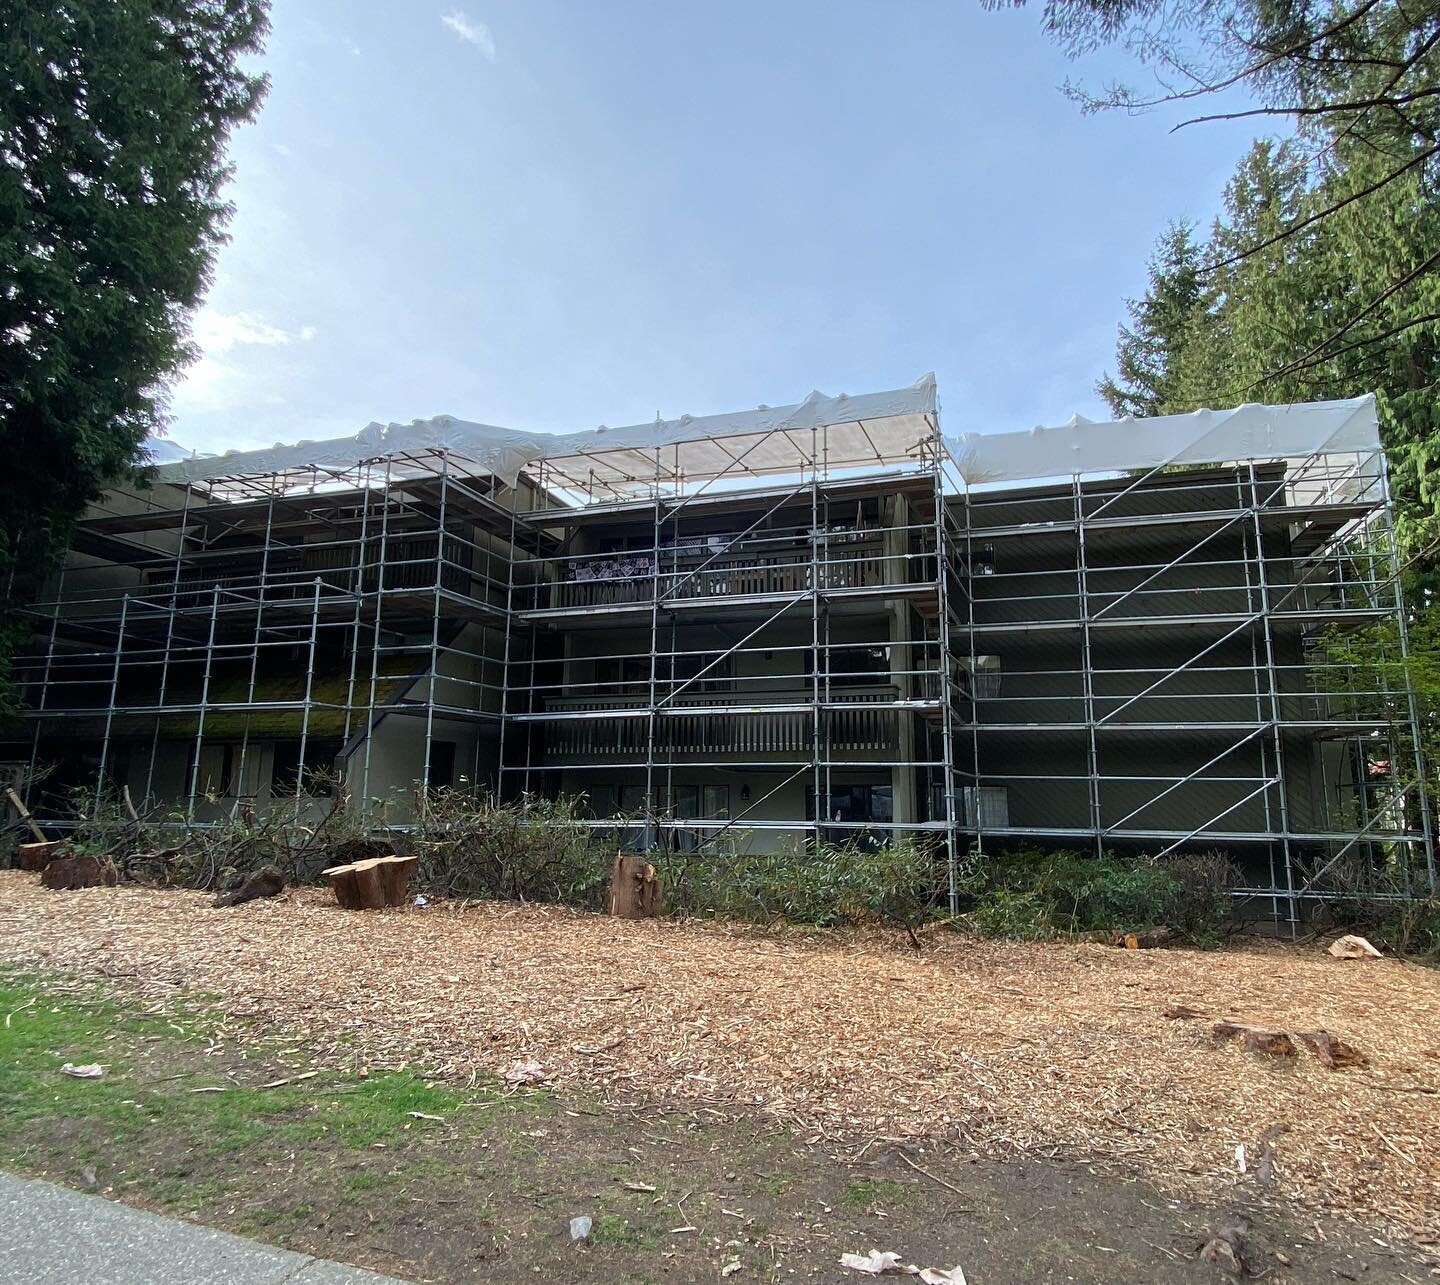 🦏 The Rhino crew made quick work of this temporary roof canopy in West Vancouver 🇨🇦 Keeping your project on time, without weather delays or damage - visit us online at www.Rhinowrap.ca and see what we can do! 
#shrinkwrap #shrinkwrapping #scaffold